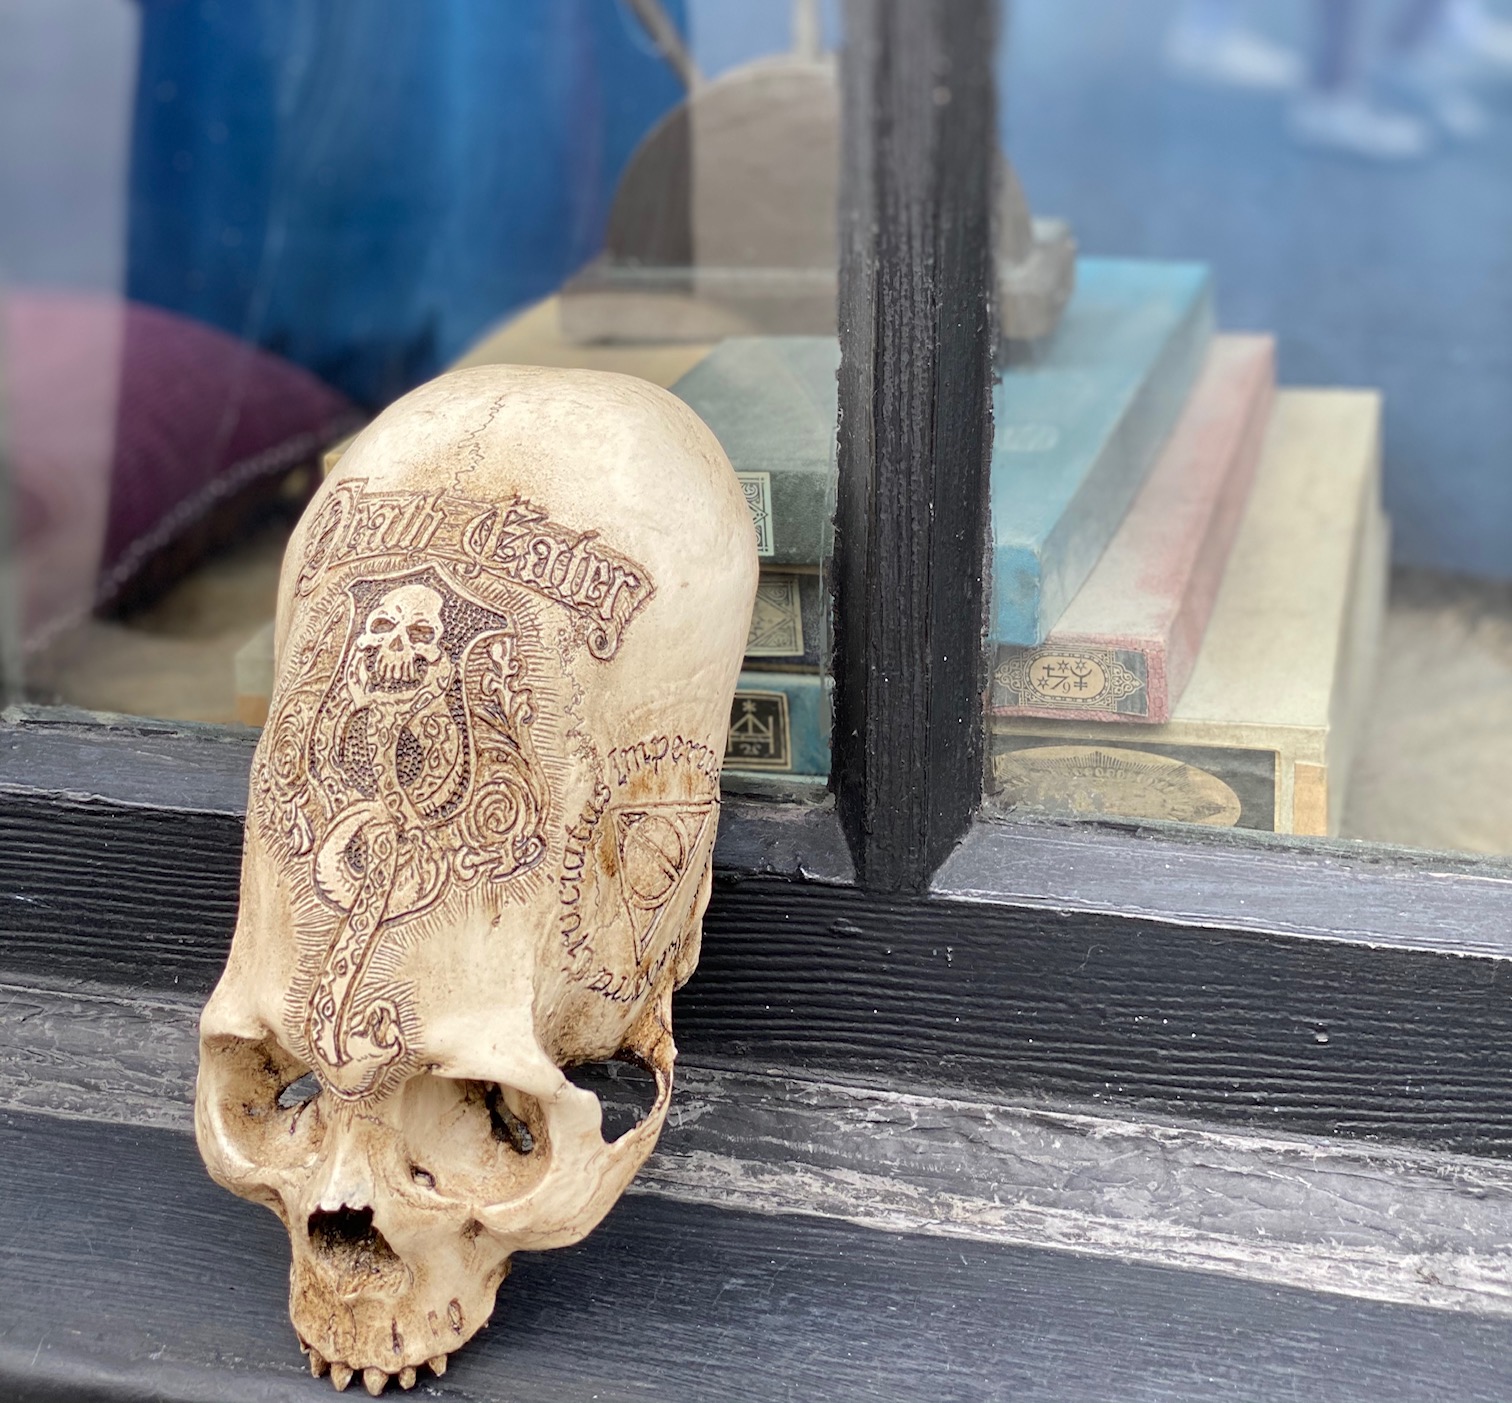 Collect Replica Intricately Carved Skulls In Orlando, FL With New Game